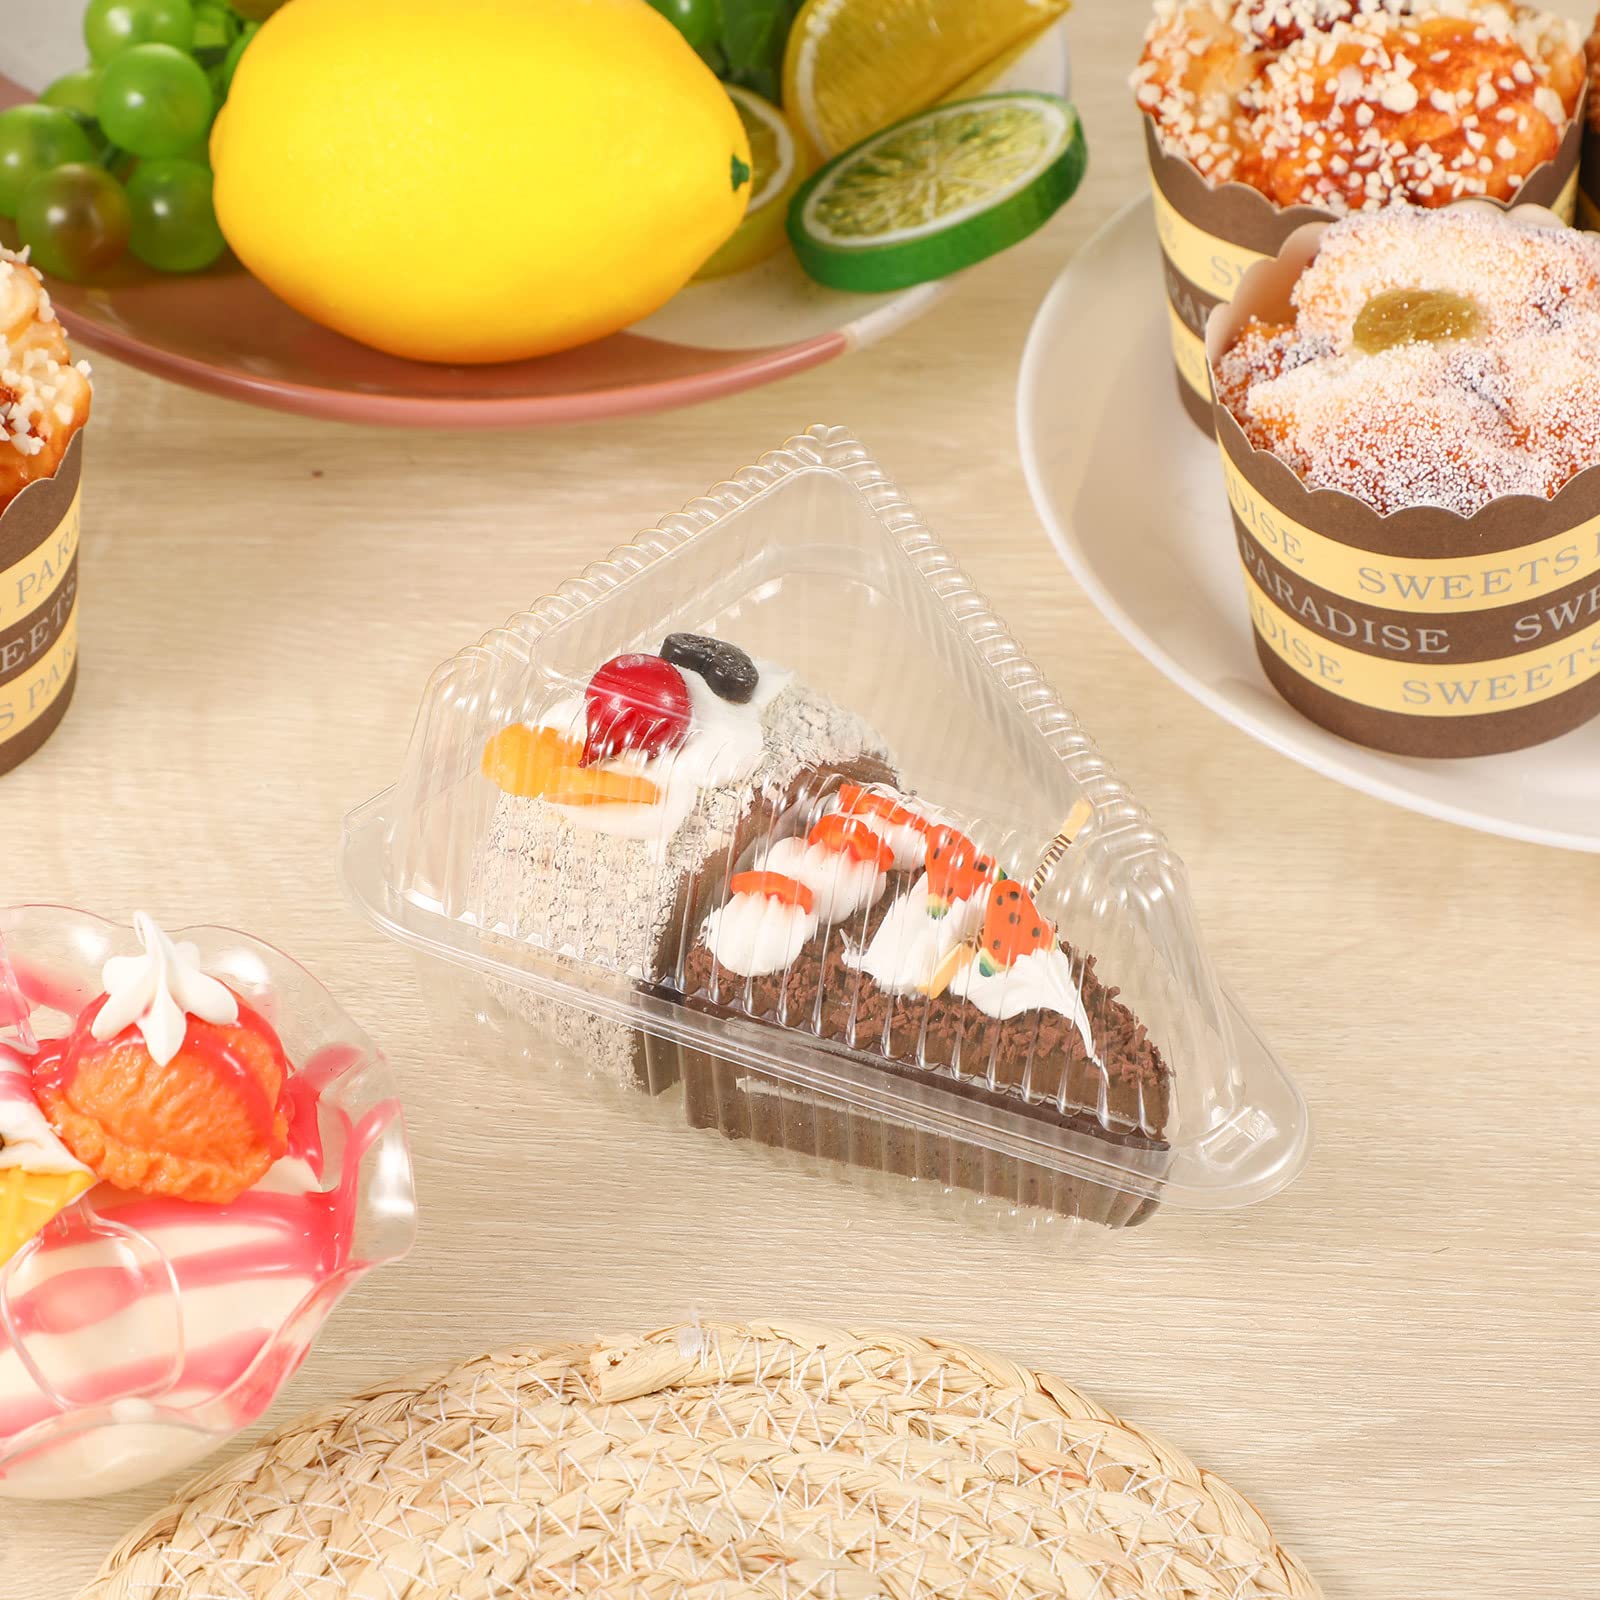 100 Piece Pie Container with Lid Clear Cake Slice Container Plastic Medium Dome Hinged Lid Cheesecake Container, Pie Dessert, Food Box, Take out Packaging for Home, Bakery and Cafe Business